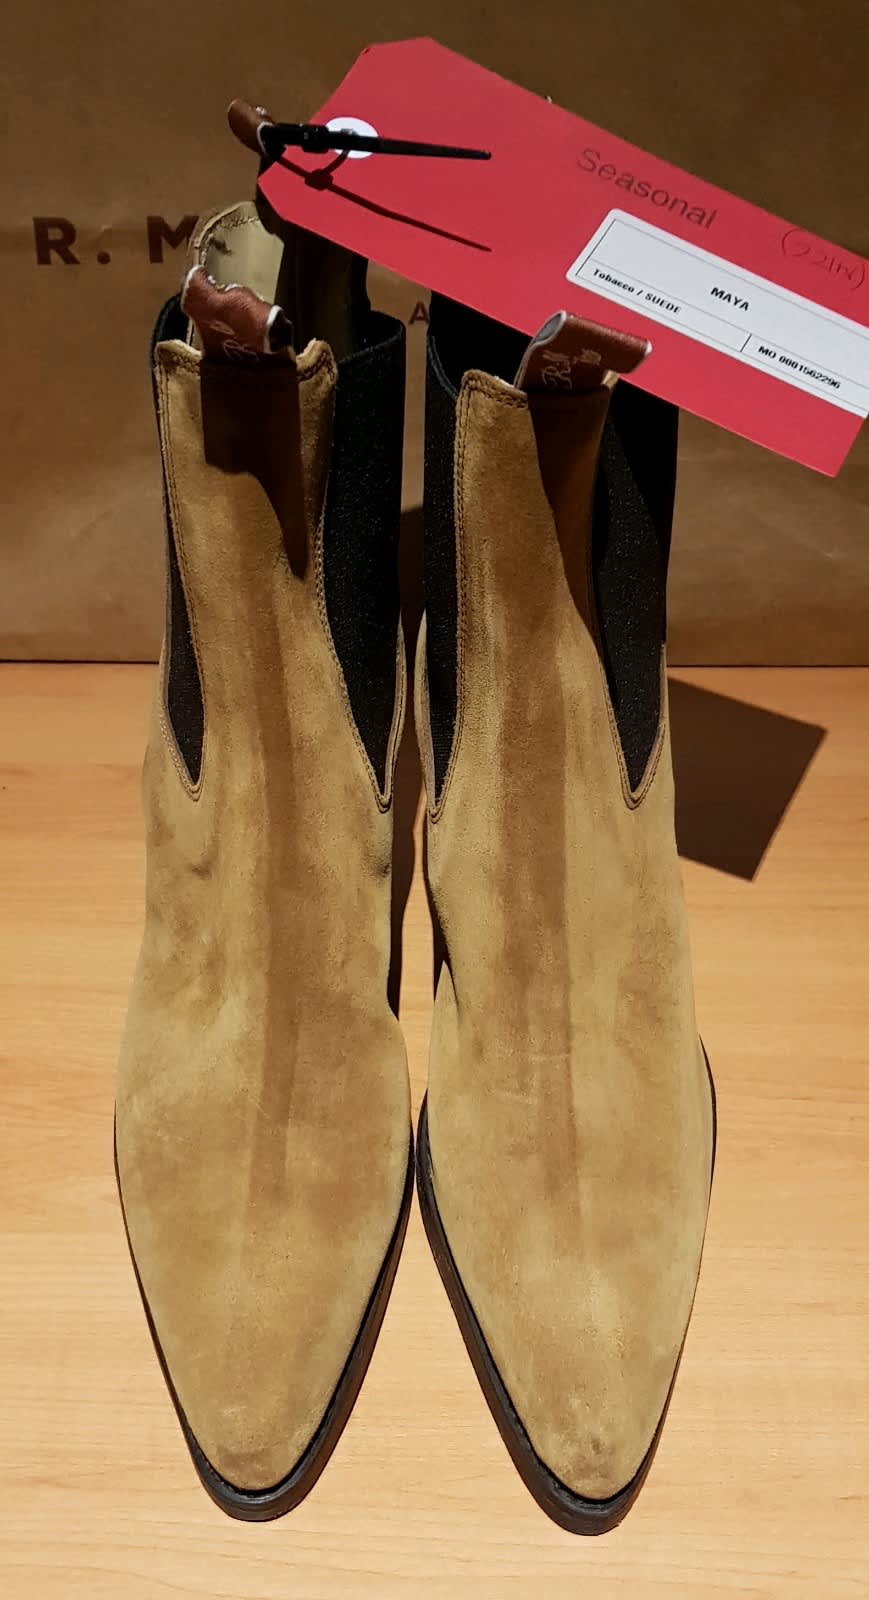 RM Williams ladies yearling boots size 8D, Women's Shoes, Gumtree  Australia Bega Valley - Bega